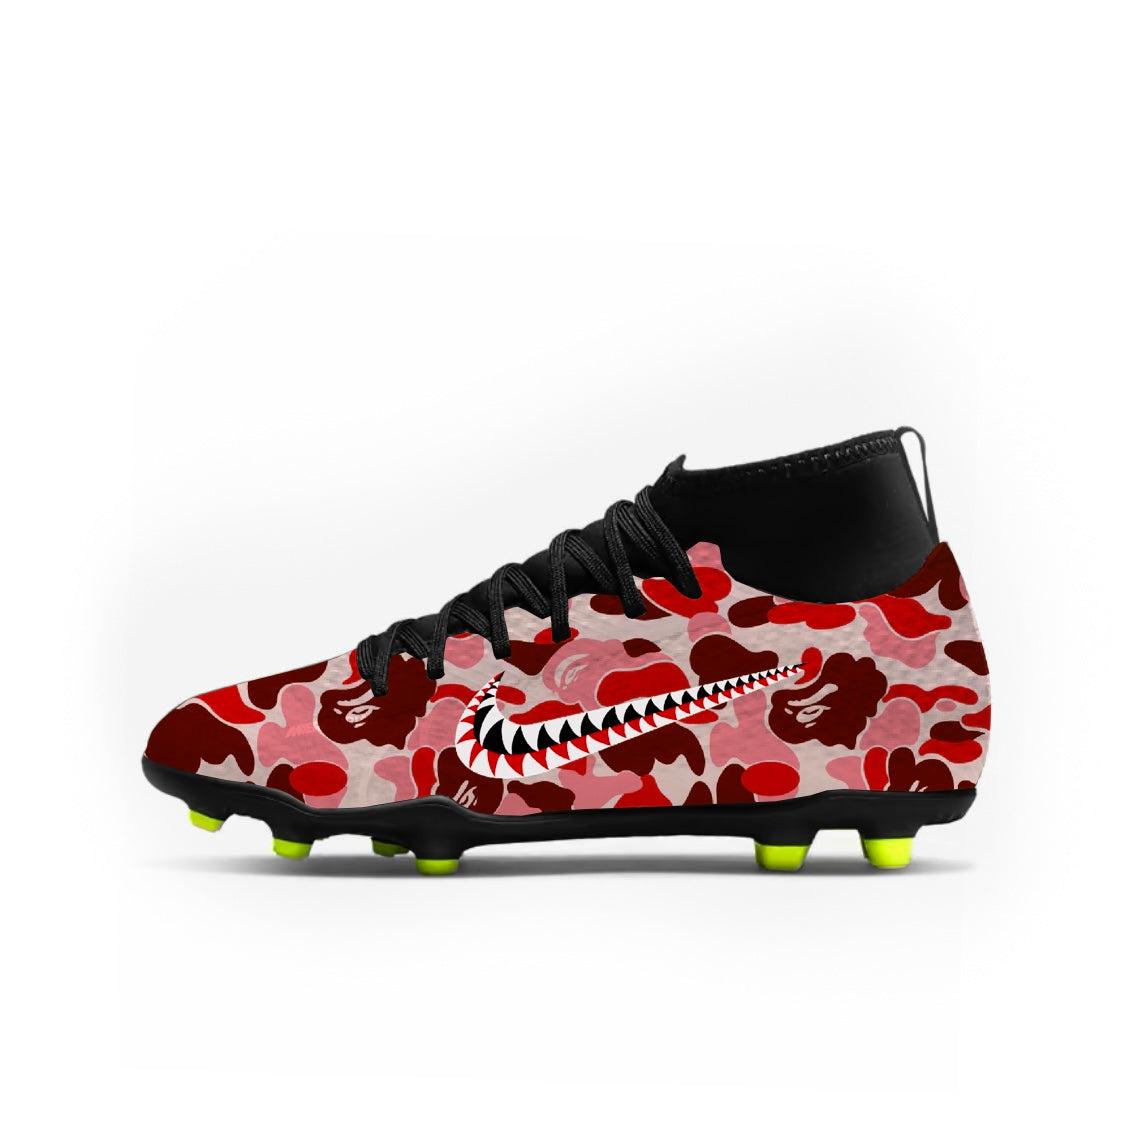 Jordan Youth Football Cleats 5Y / Red